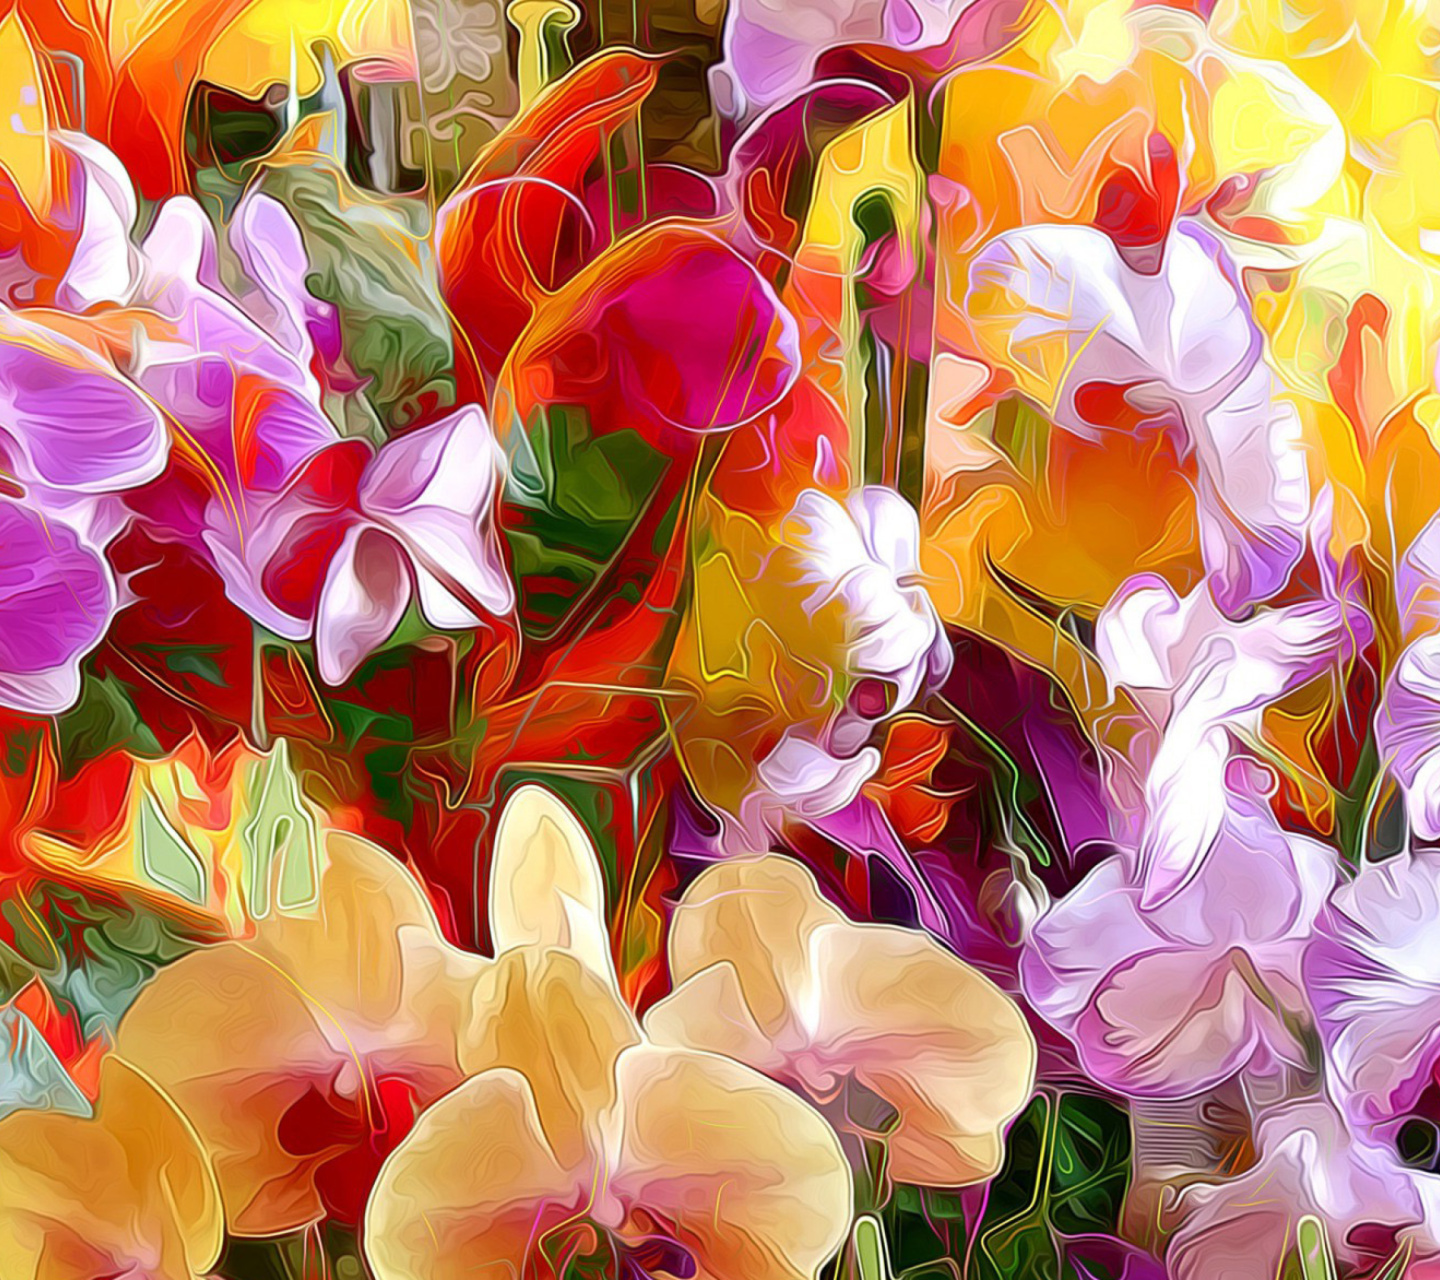 Beautiful flower drawn by oil color on canvas screenshot #1 1440x1280